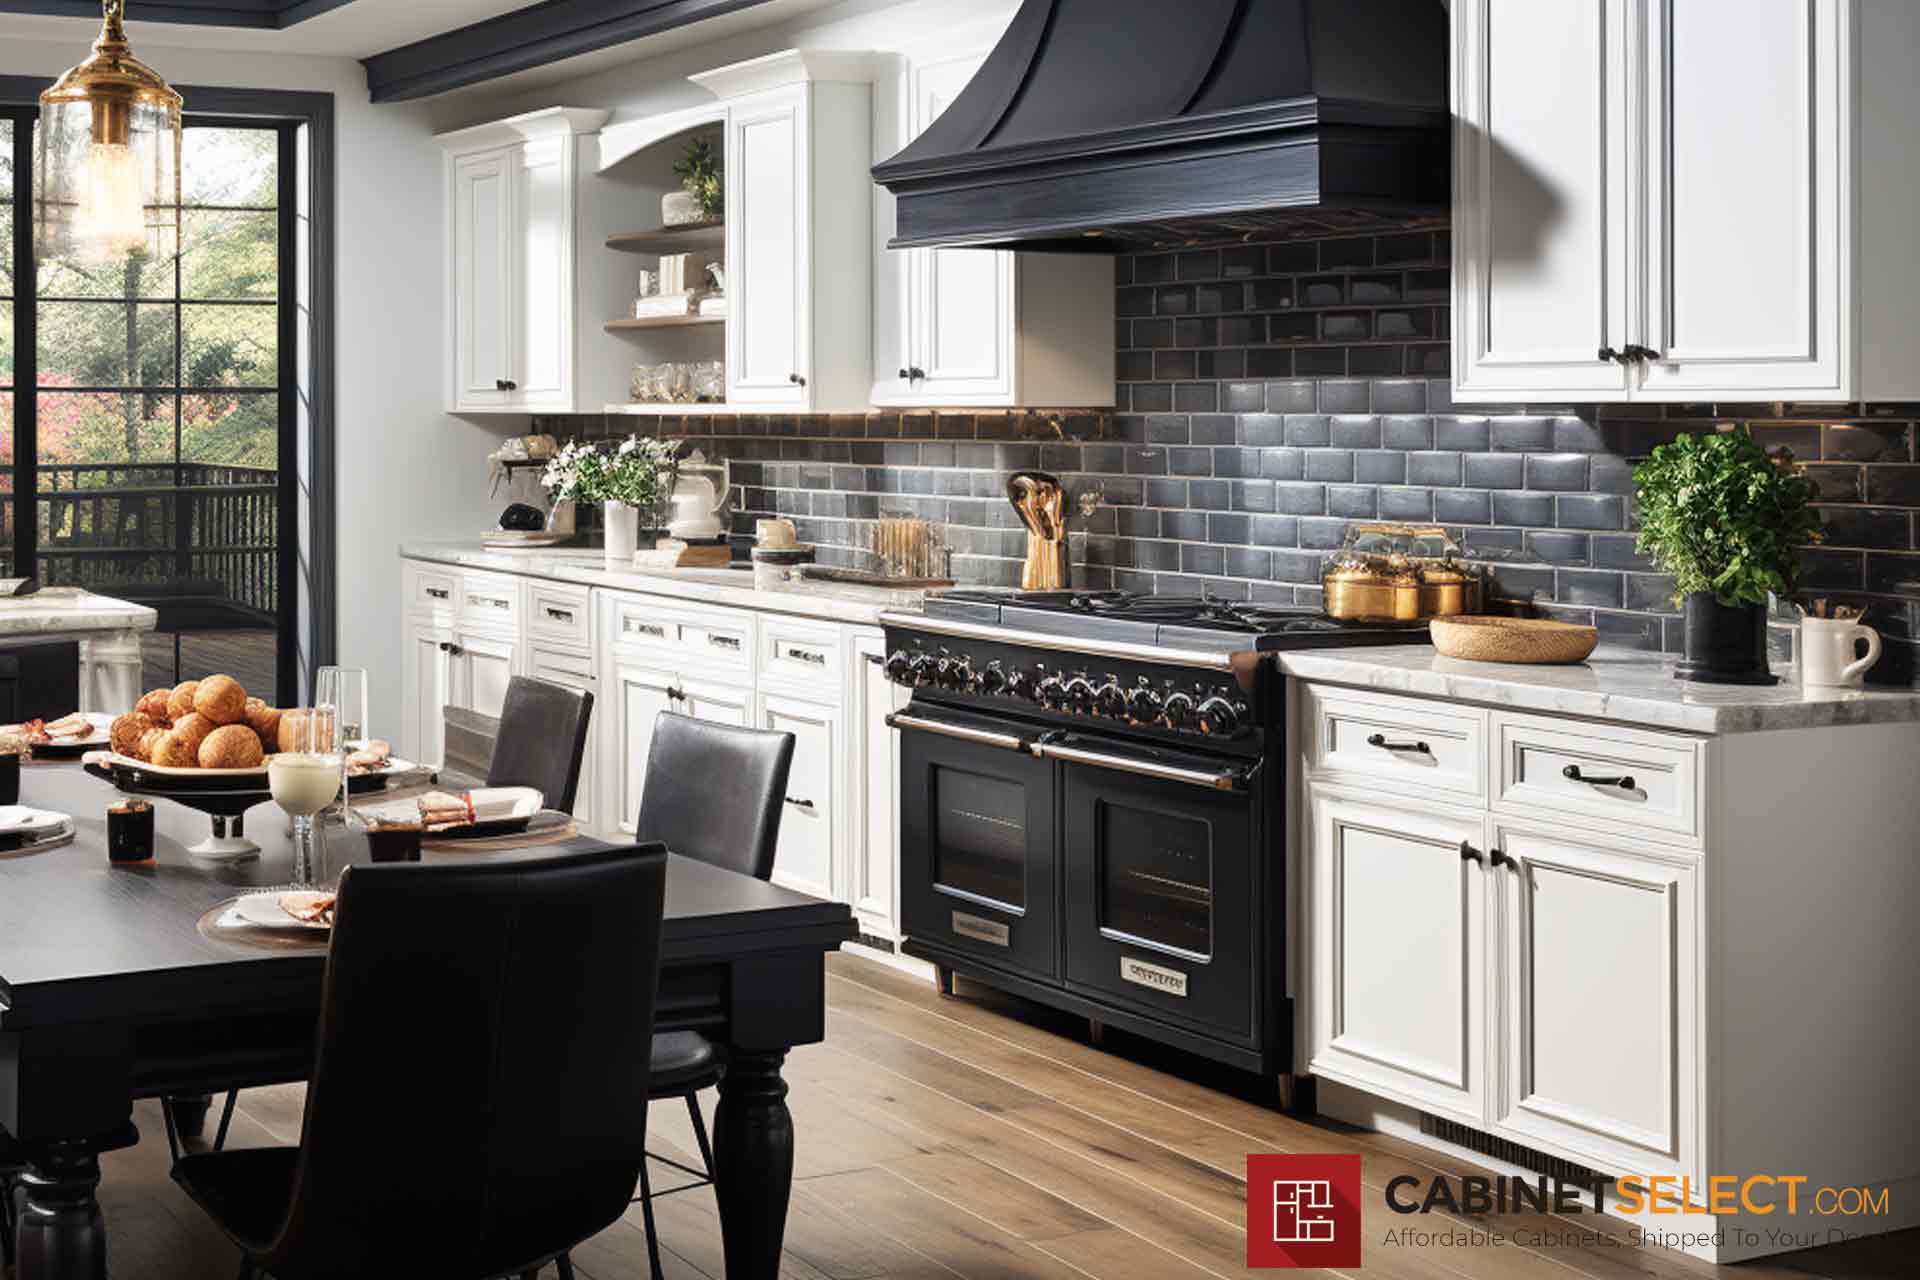 Be Bold with Black Stainless Steel Appliances